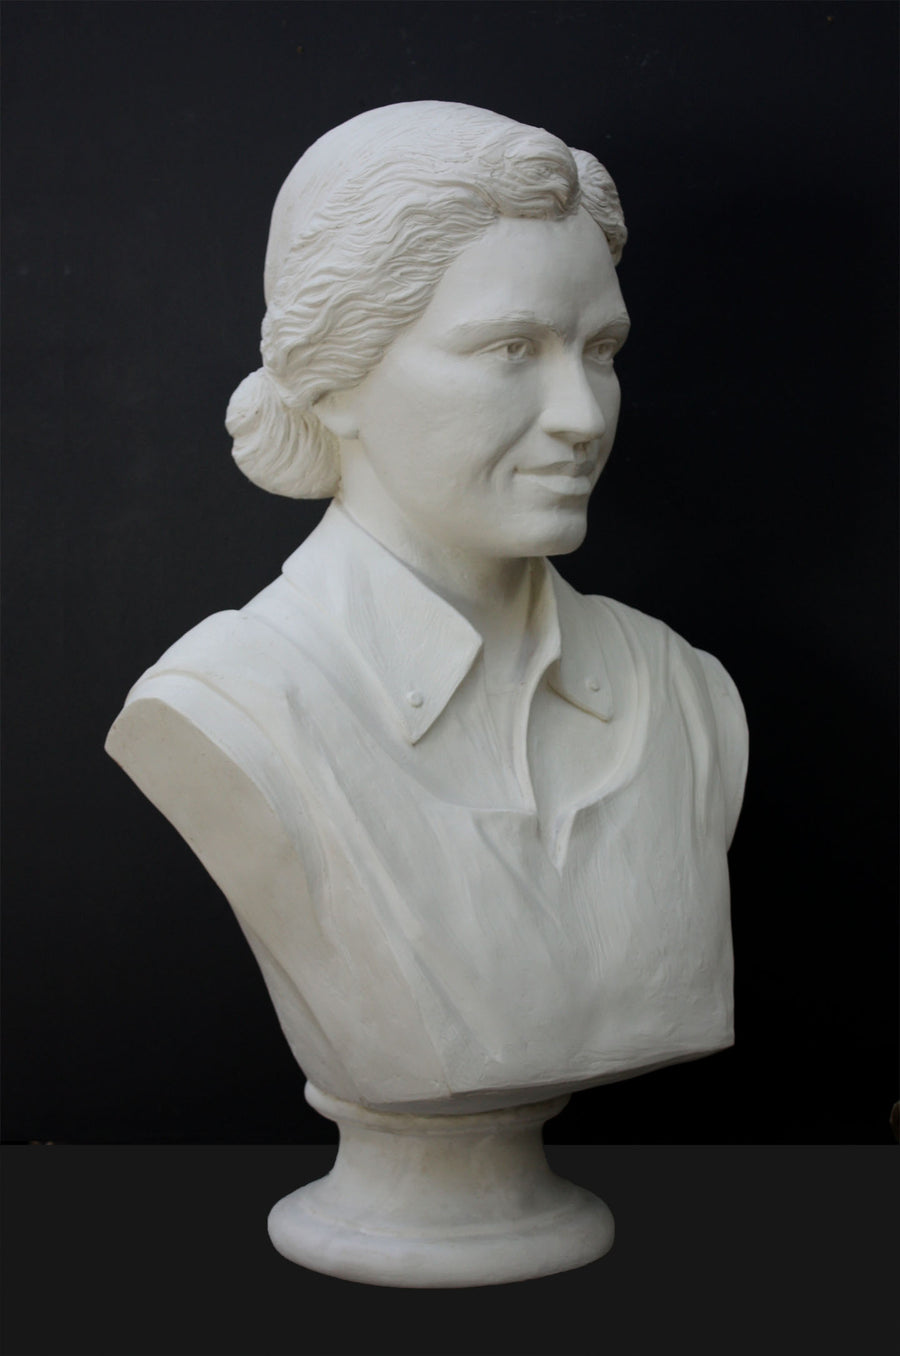 Photo of plaster cast of sculpture bust of Rosa Parks on a black background